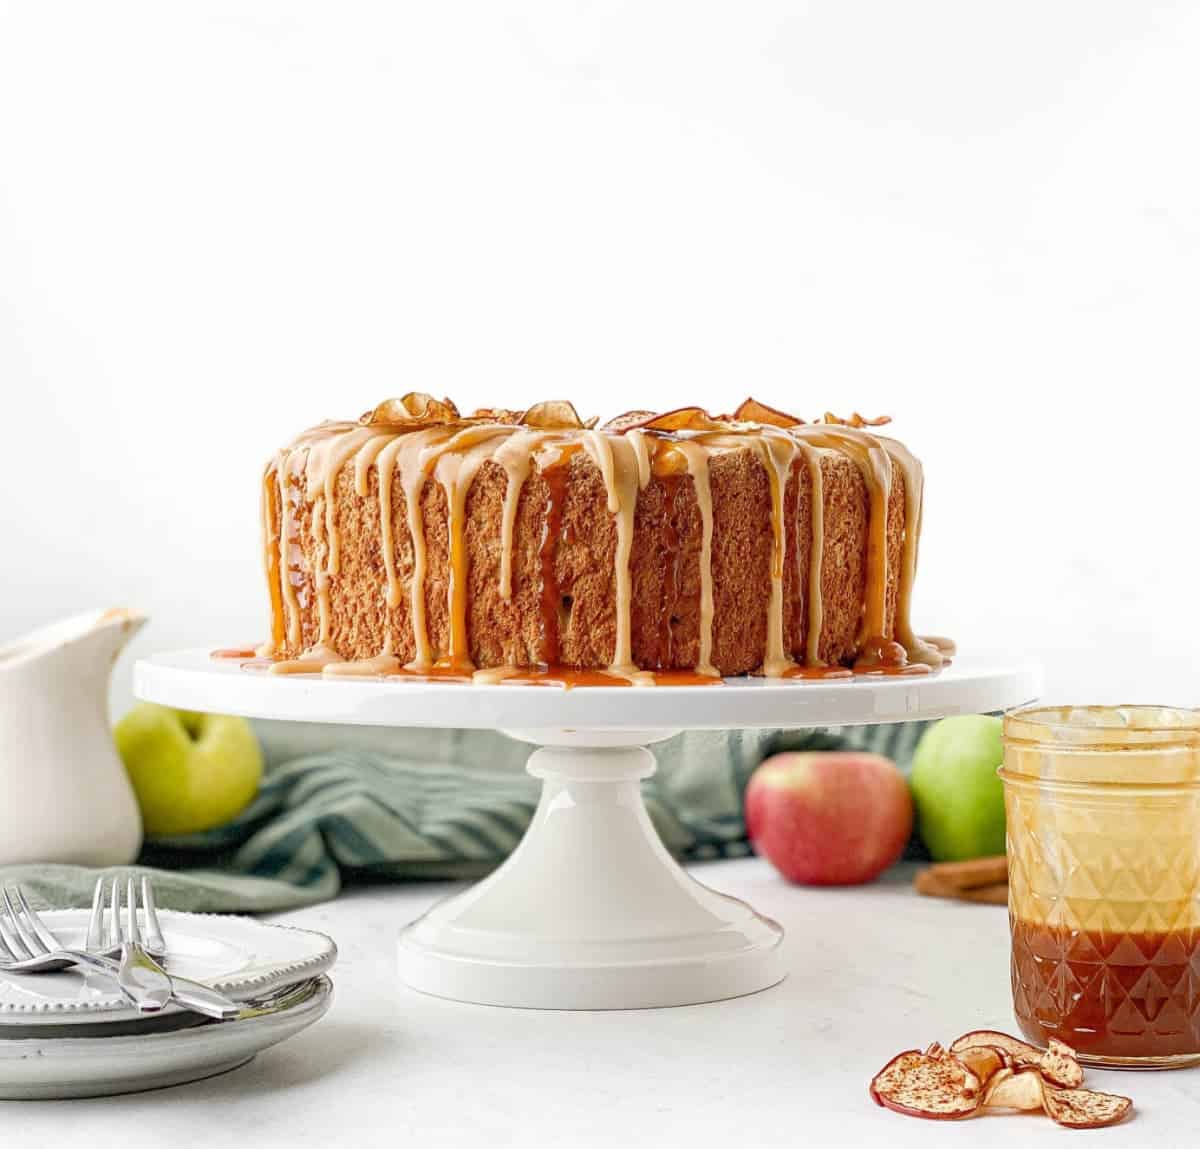 Caramel Apple Angel Food Cake on a white cake stand with apples, cinnamon sticks, and a jar of salted caramel sauce.